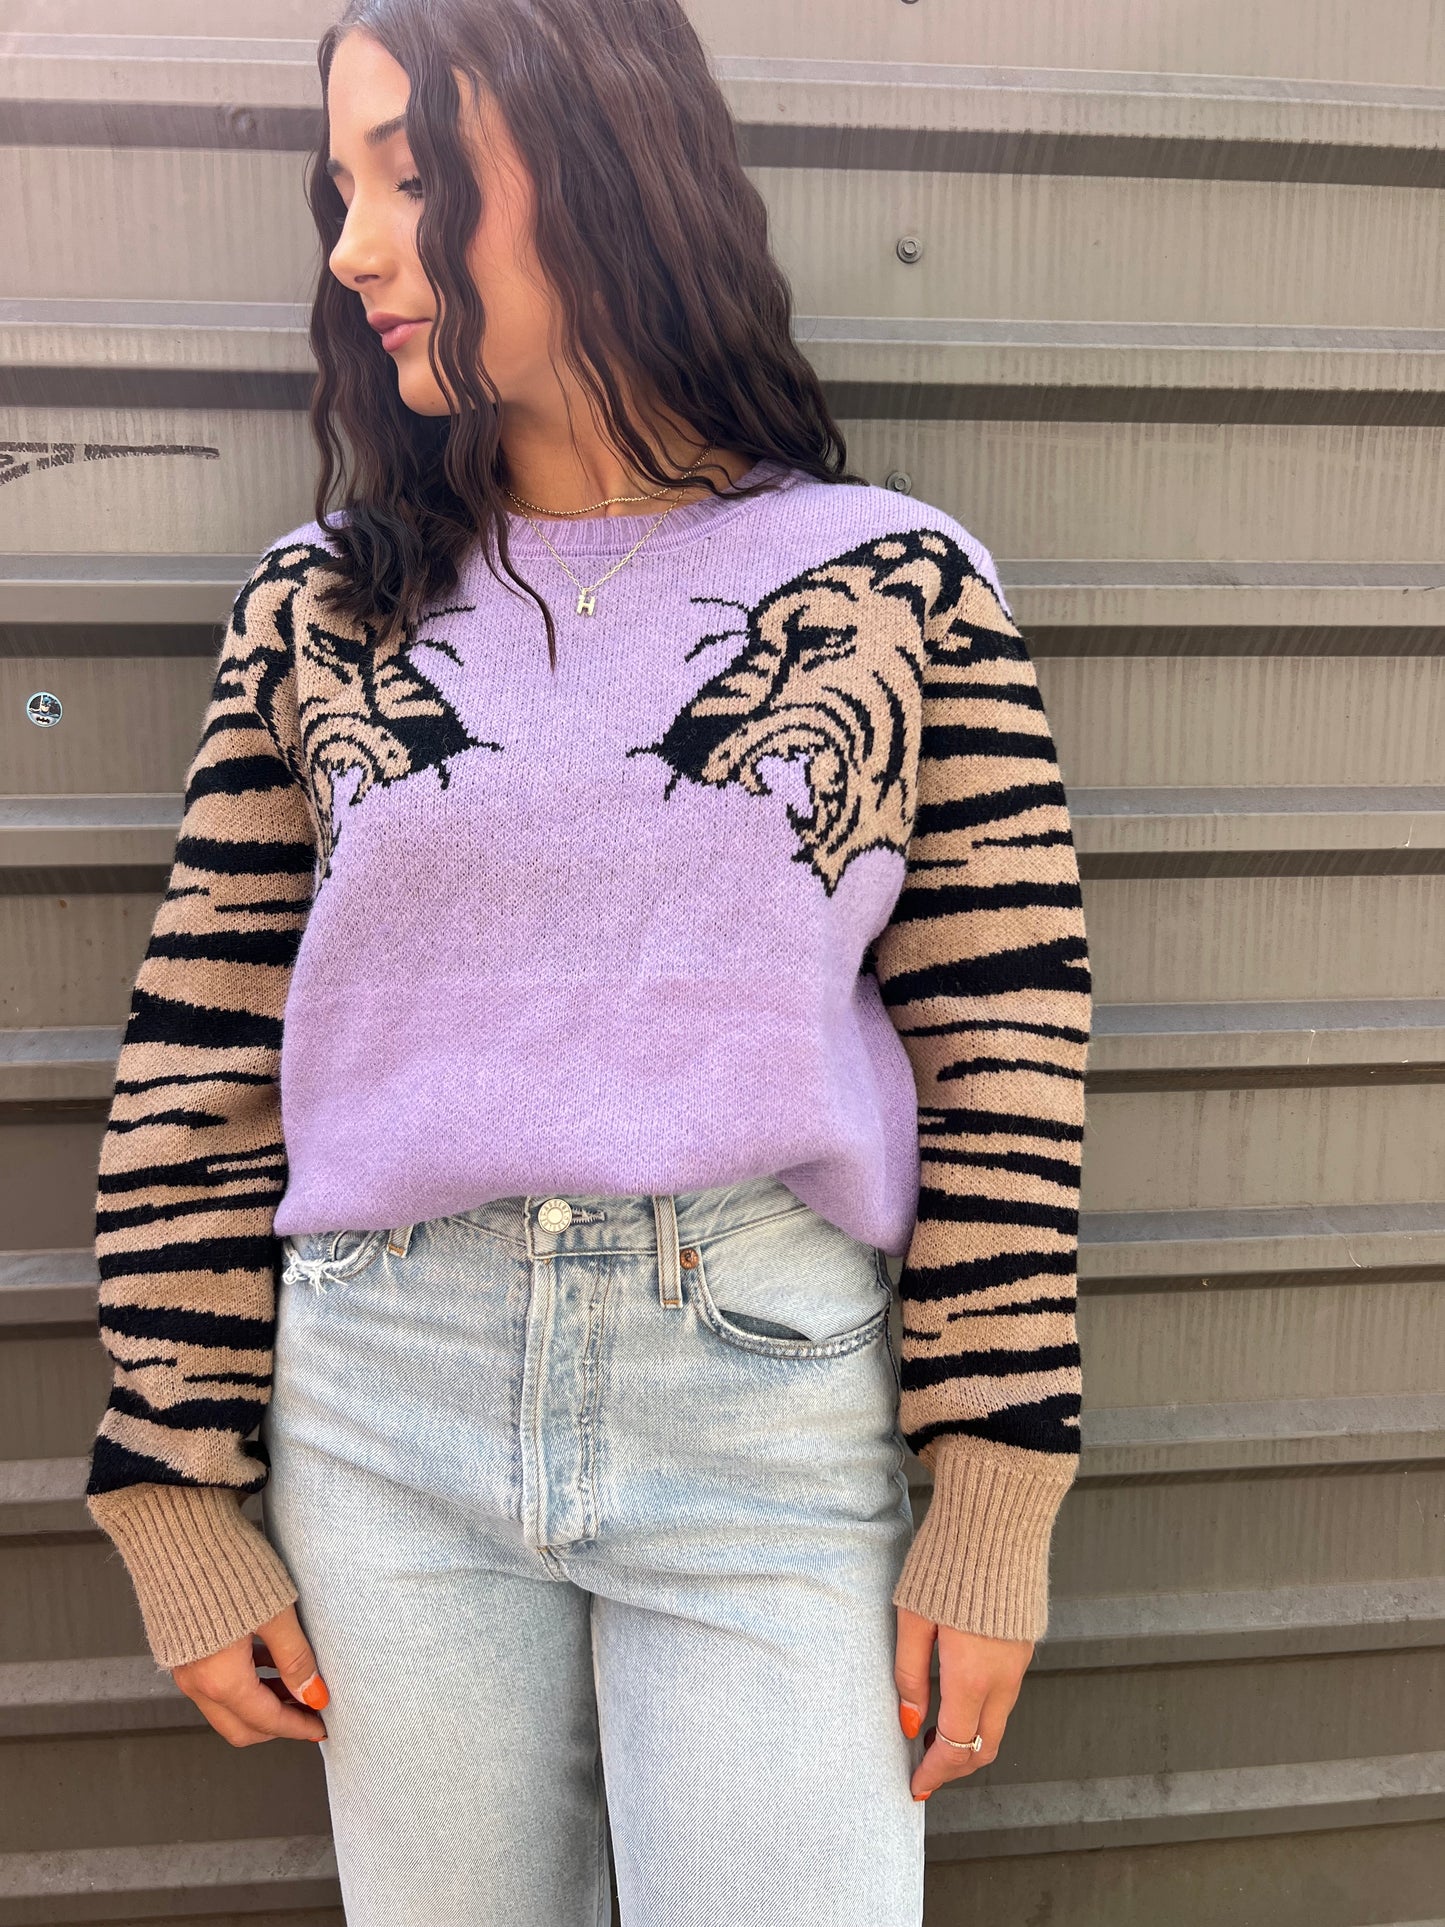 TIGER SLEEVE PURPLE SWEATER - THE HIP EAGLE BOUTIQUE